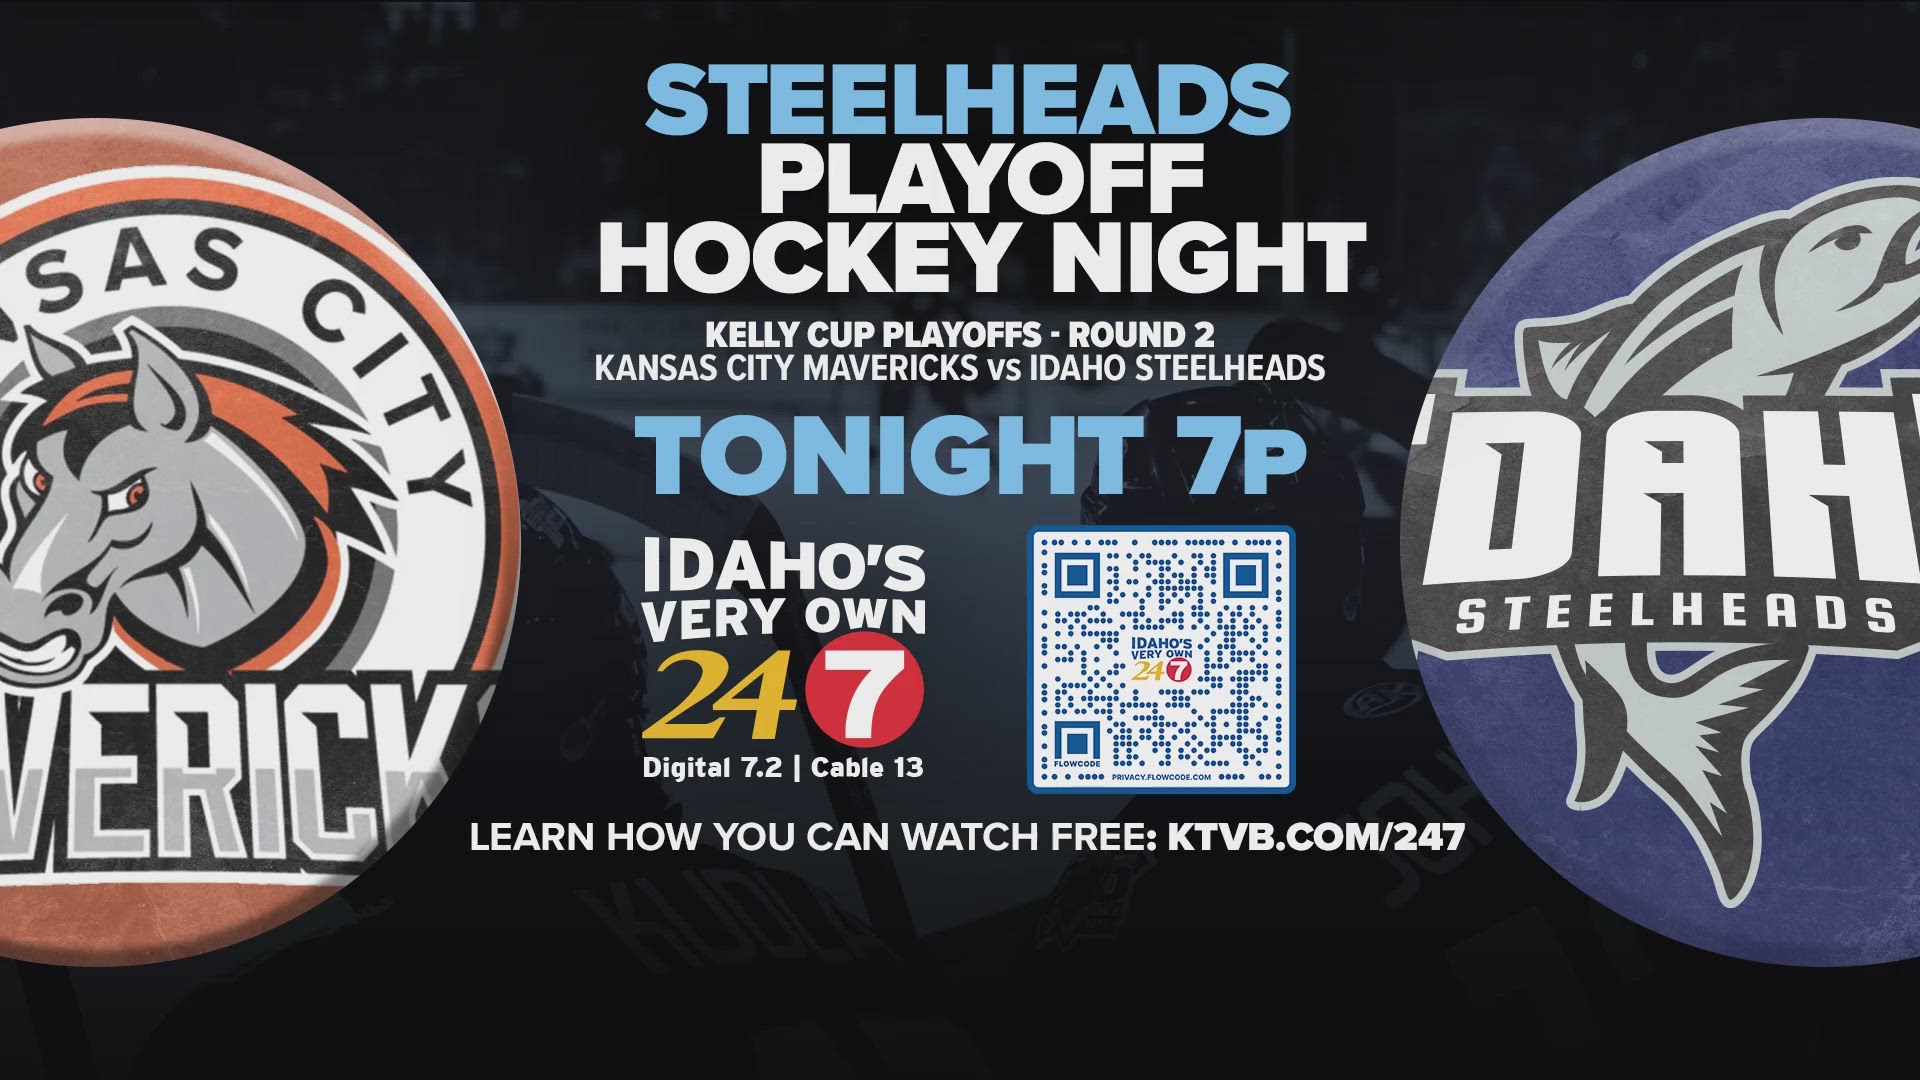 Steelheads hockey returns to the City of Trees and Idaho's Very Own 24/7 on Wednesday night. Idaho eyes the series lead after splitting two games in Kansas City.